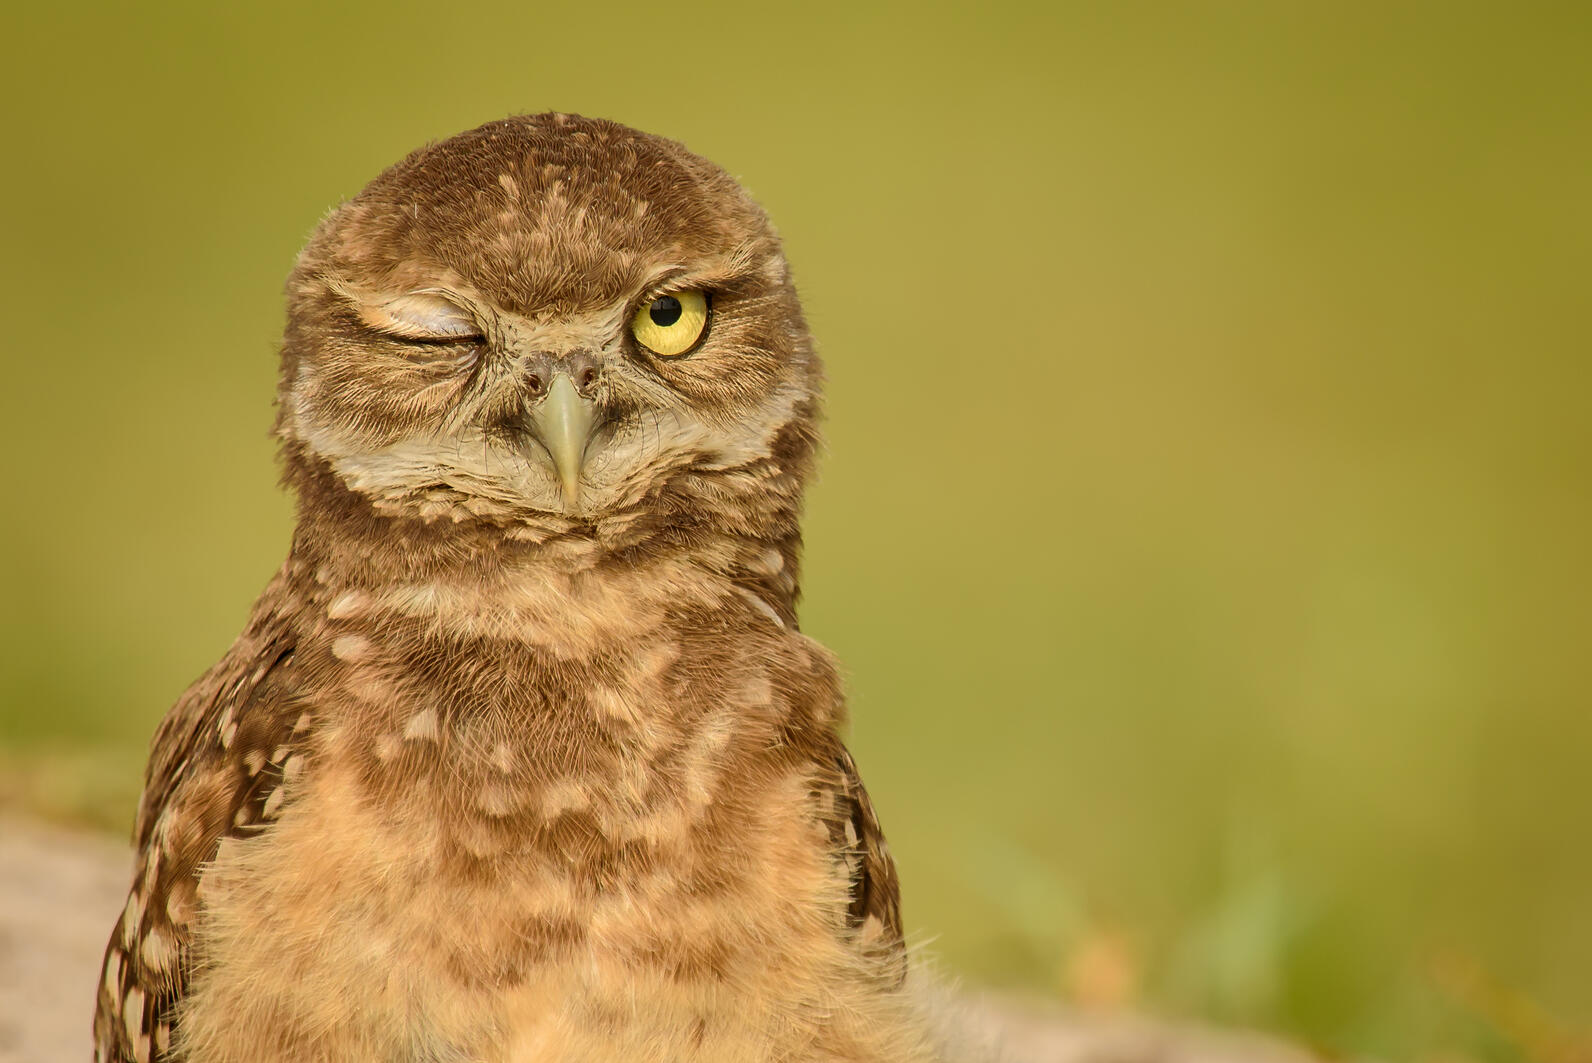 A Burrowing Owl winks at the camera against a blurred yellow-green background.